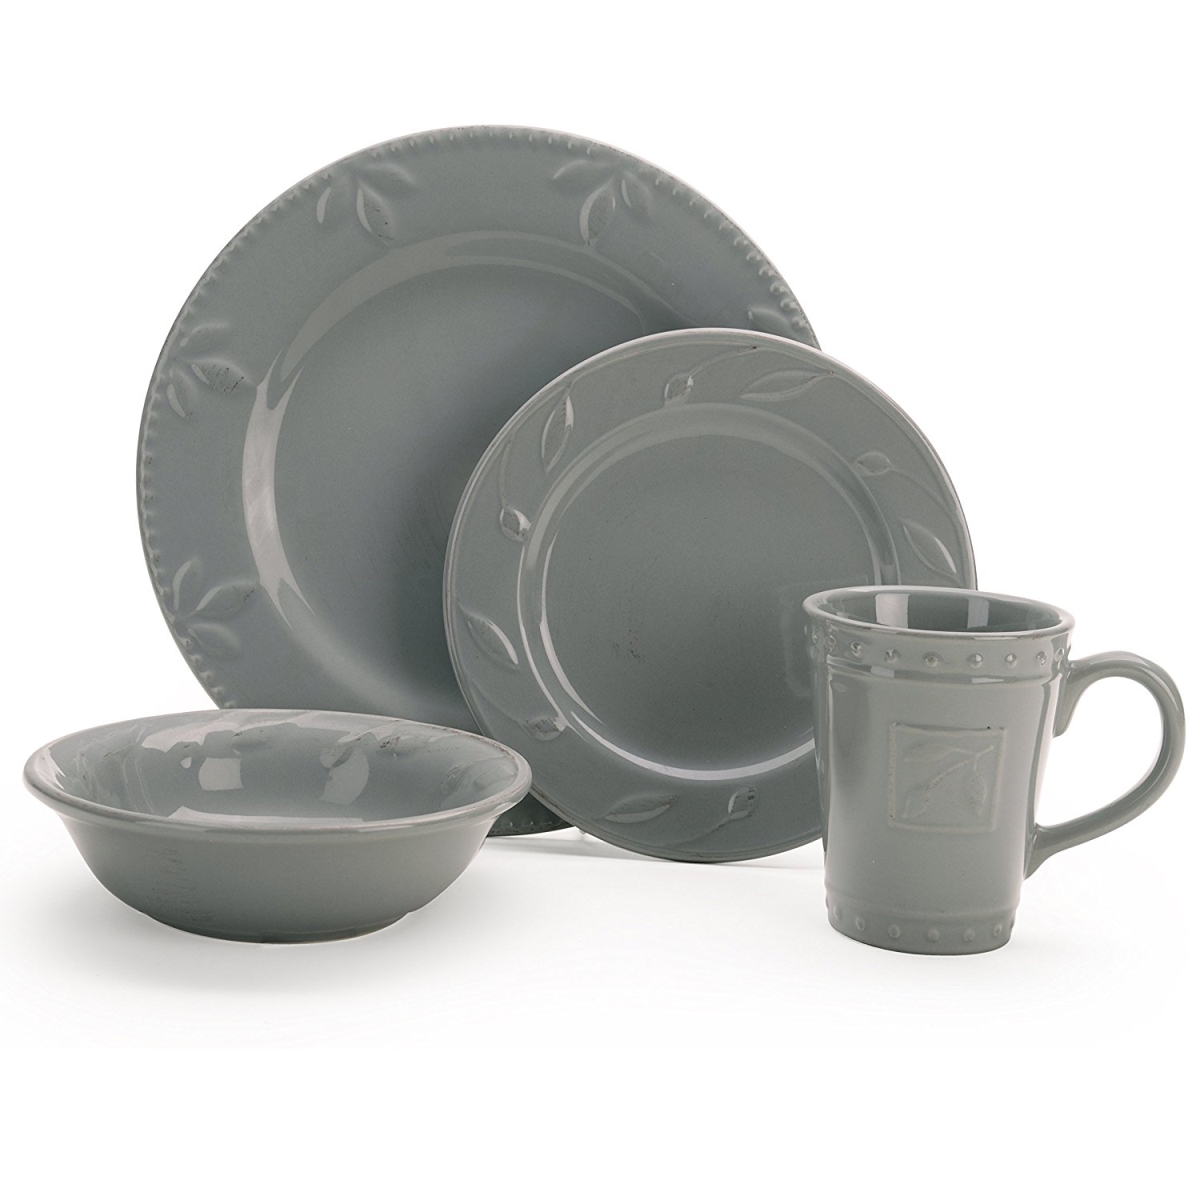 70700 Sorrento Gray Place Setting, 4 Piece